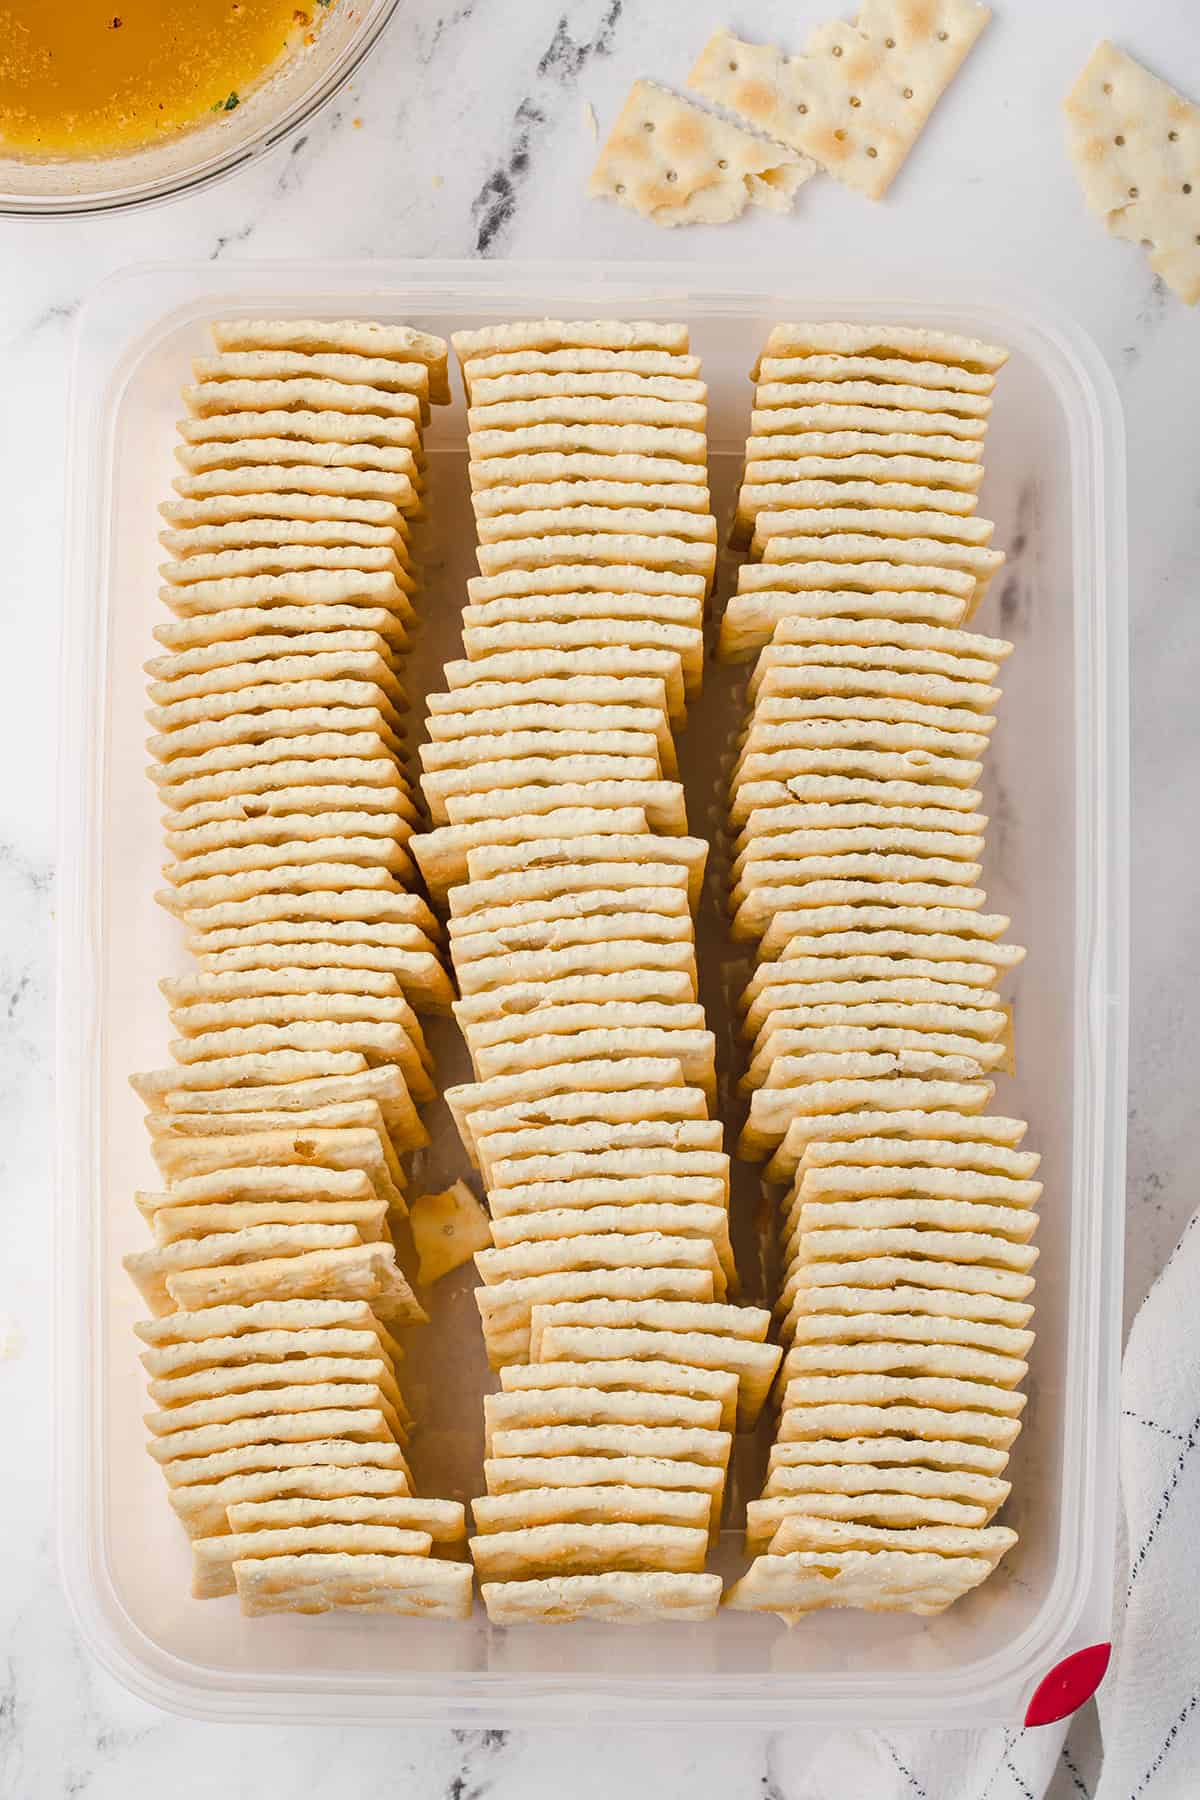 Crackers lined in a plastic container.